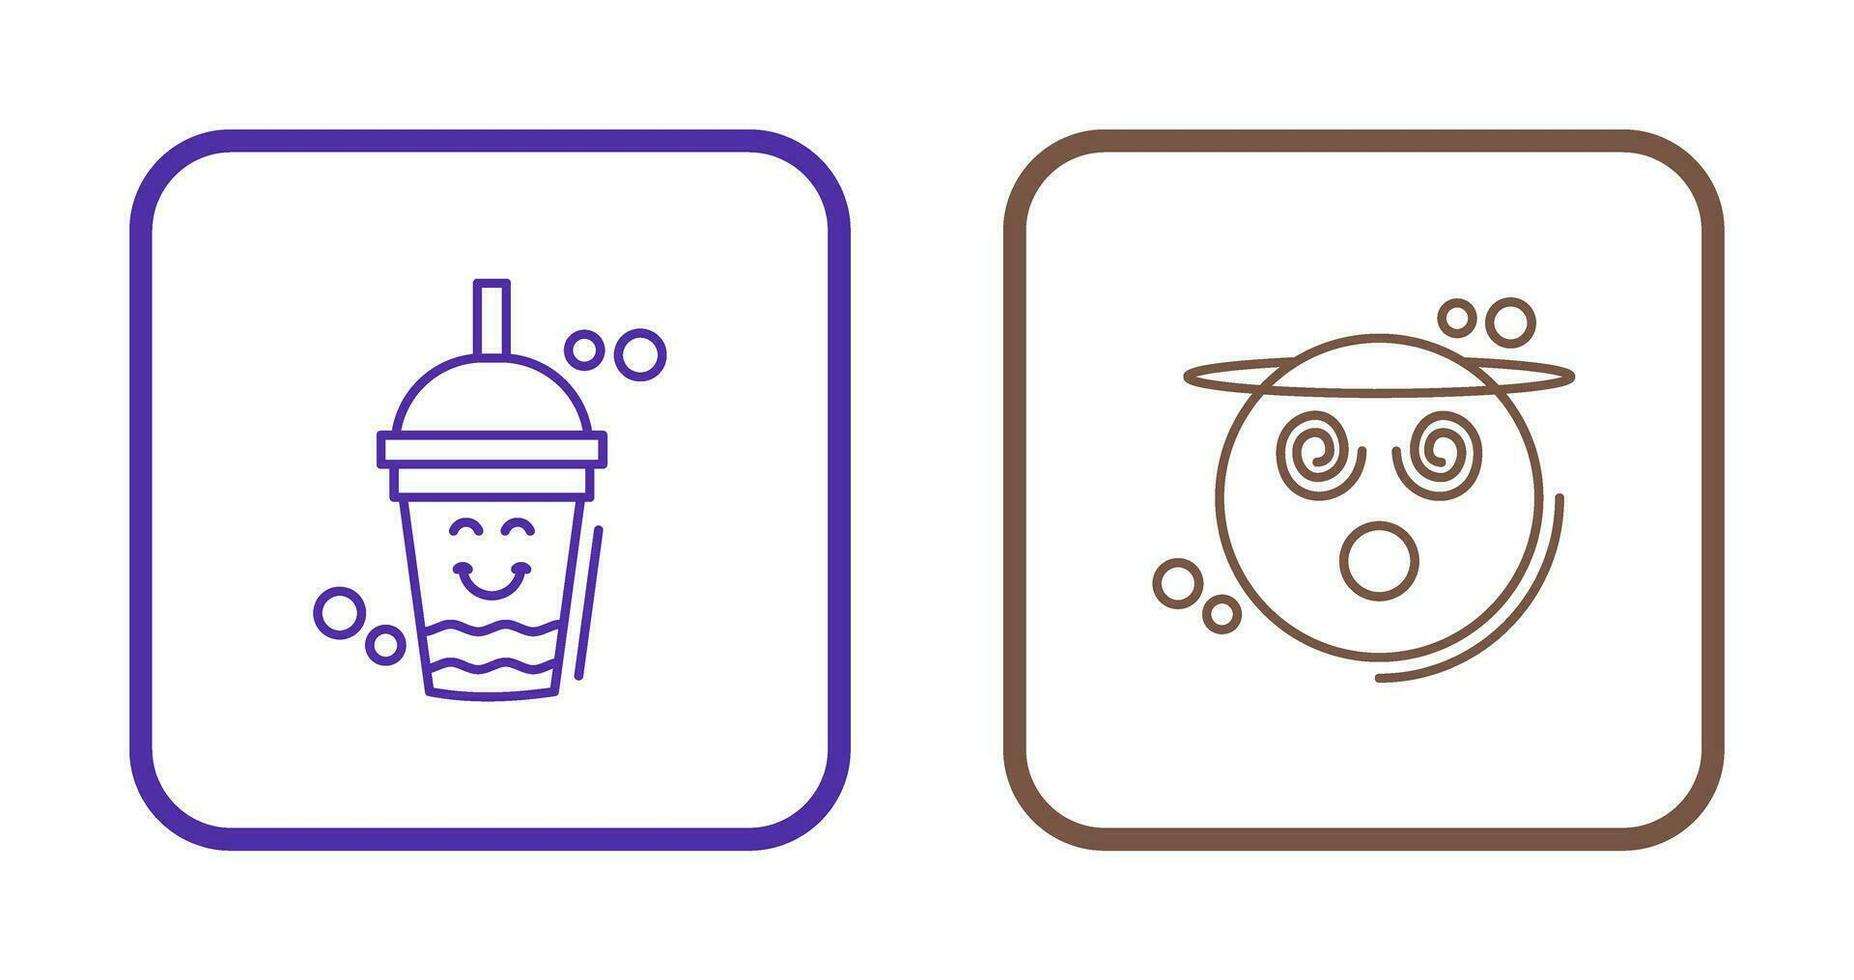 Drink and Dizzy Icon vector